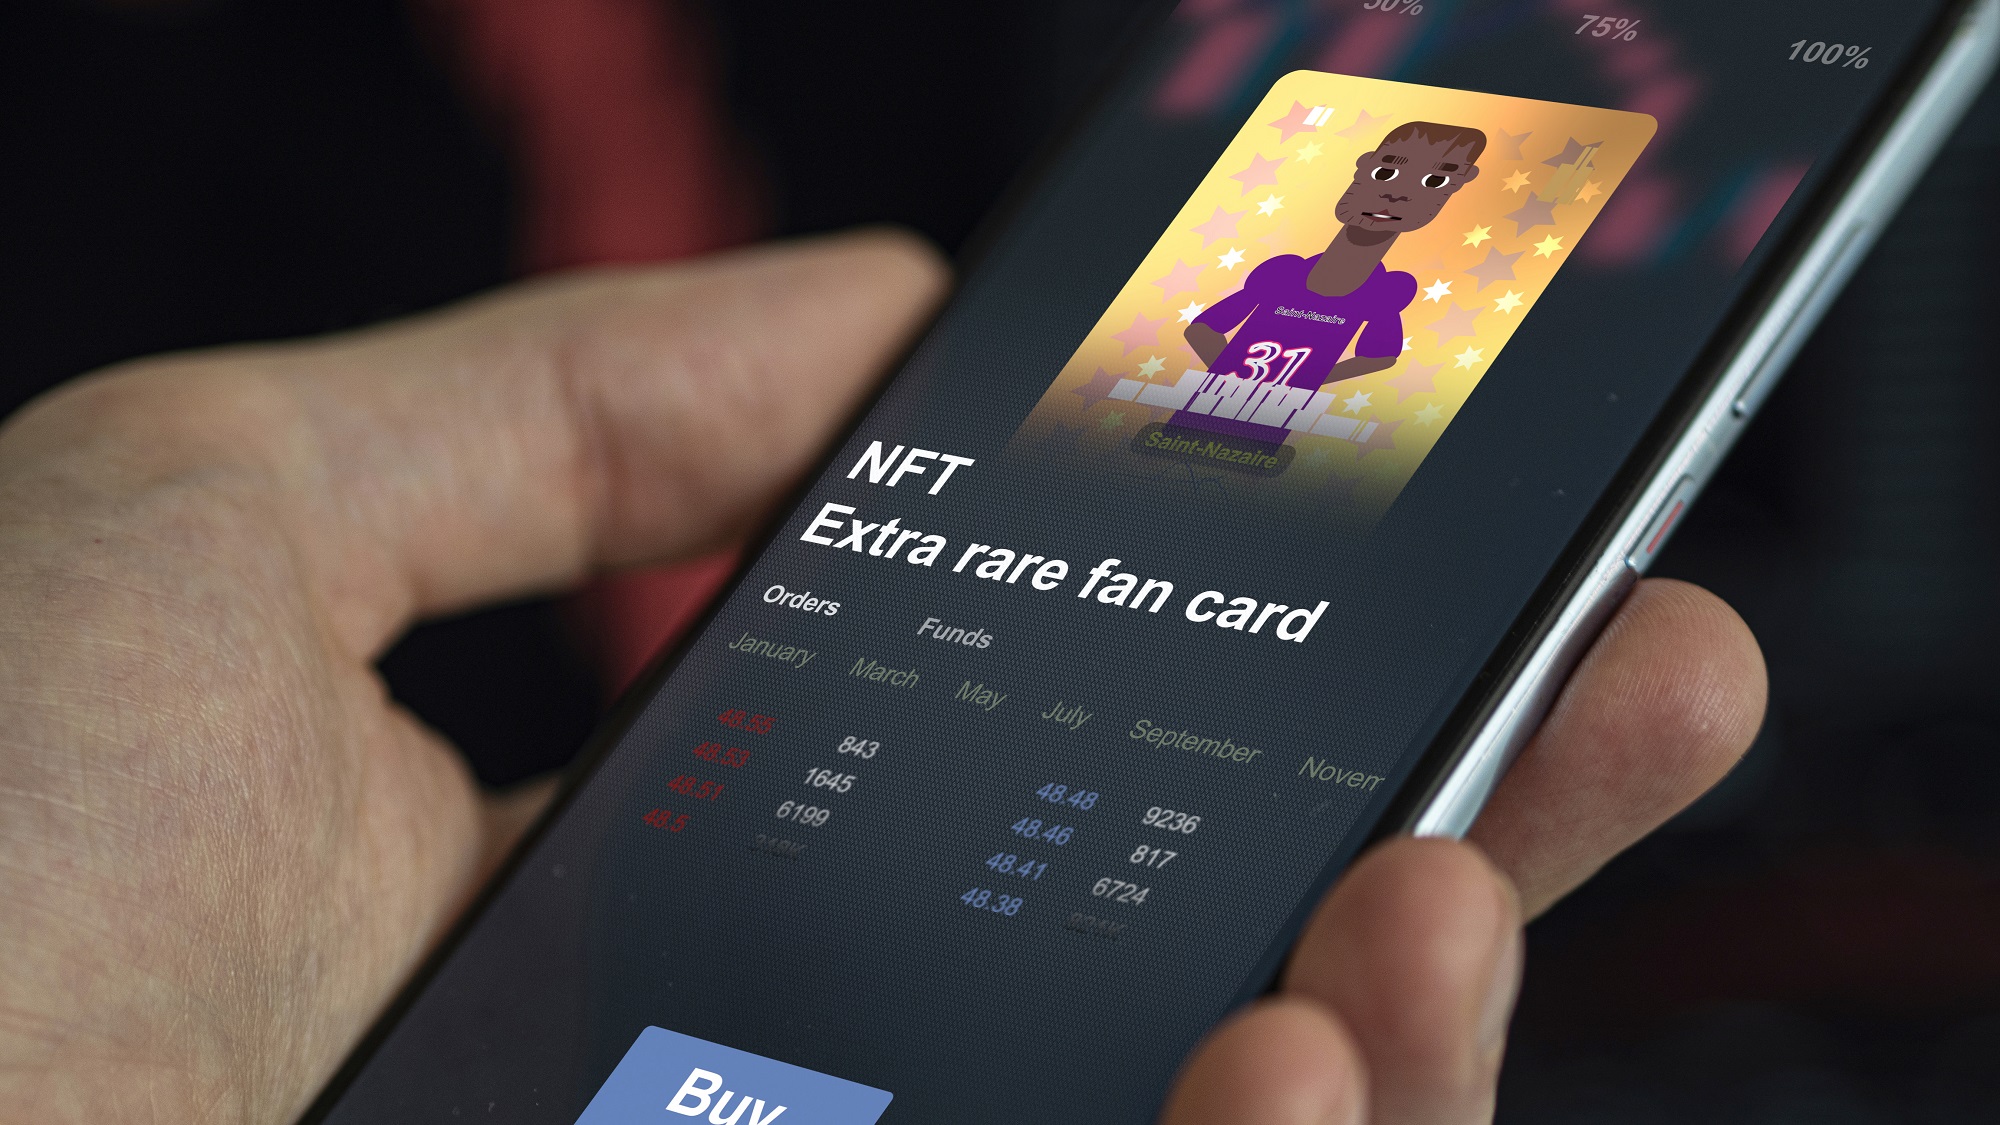 A smartphone user holds a device with an image of a sports player on it. Text reading “NFT Extra Rare Fan Card” is displayed below the image, along with a “Buy” button.